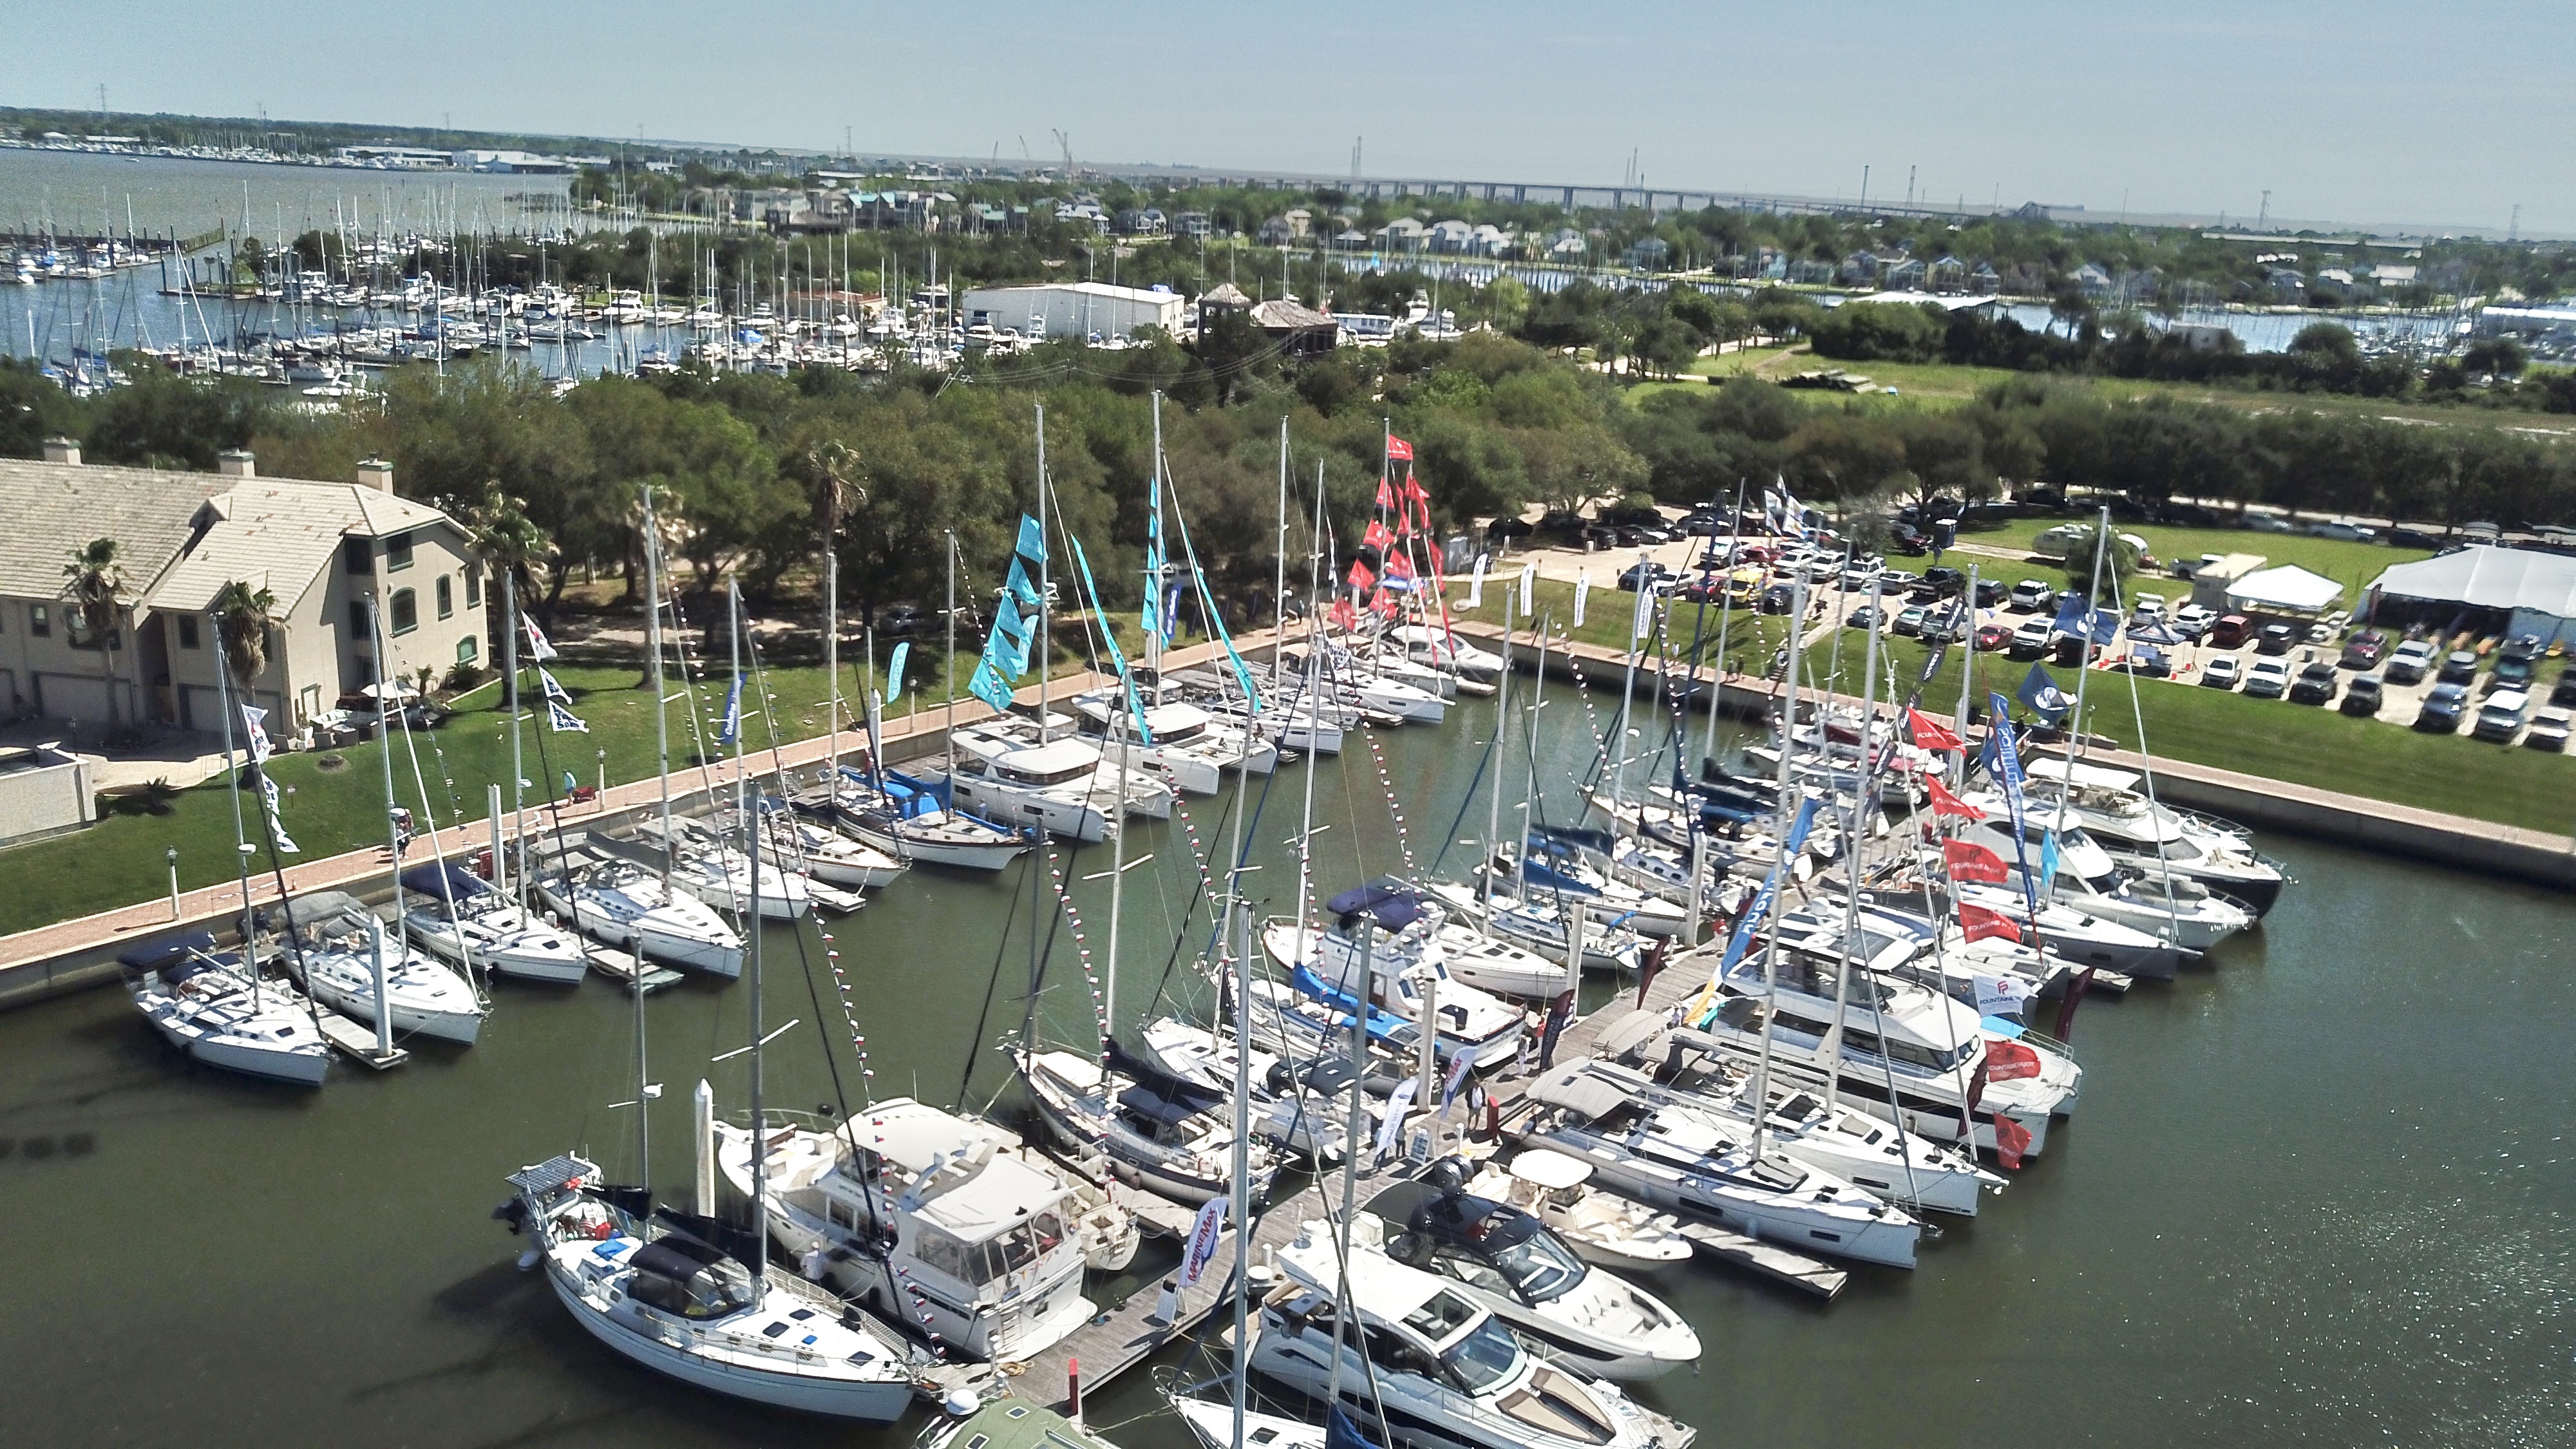 Join The Catamaran Company at the 3rd Annual Texas Free Boat Show